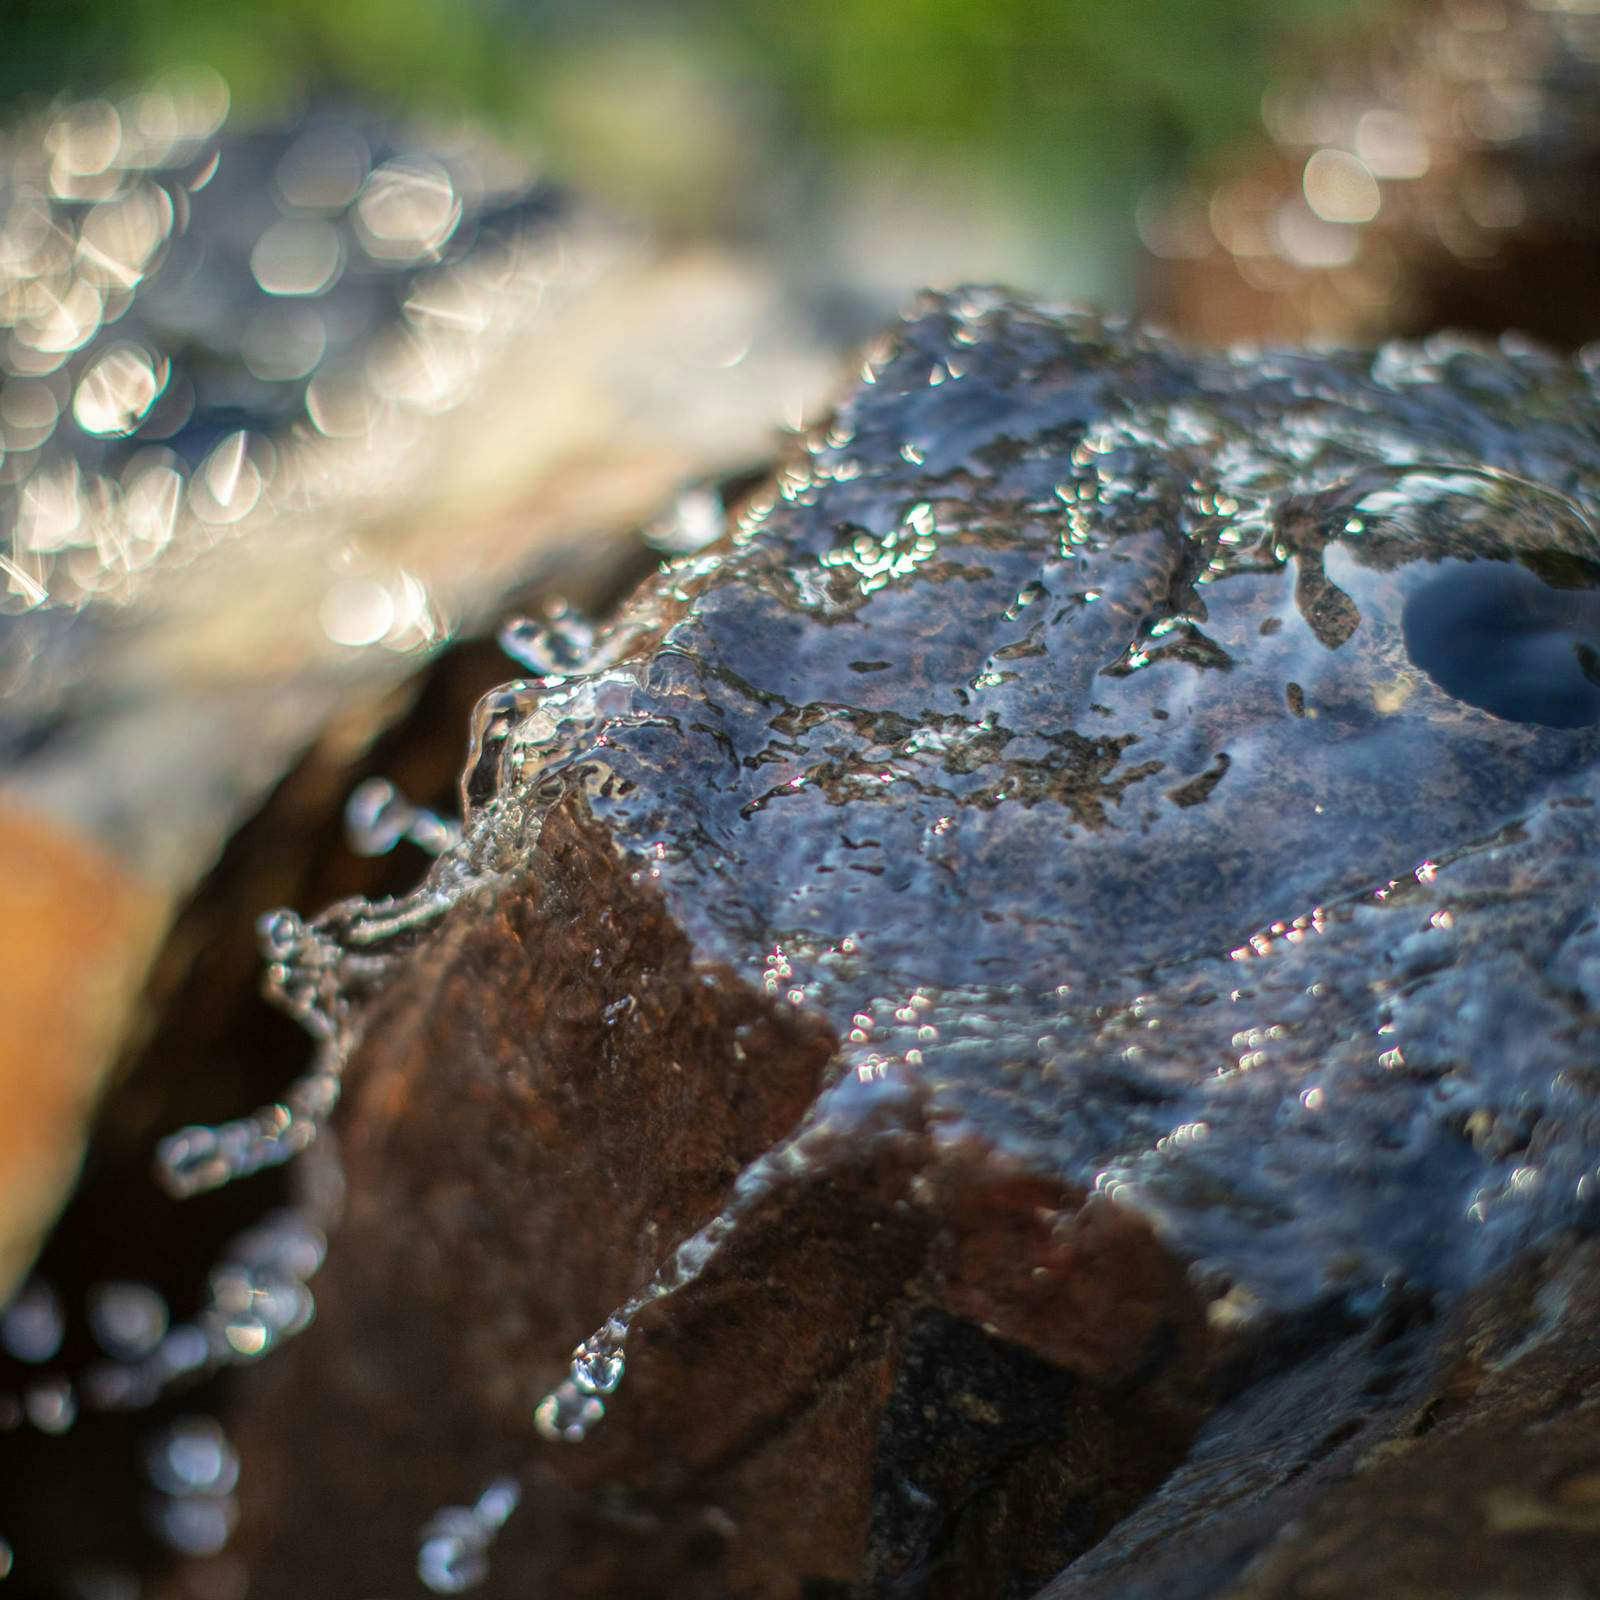 Details of the water feature